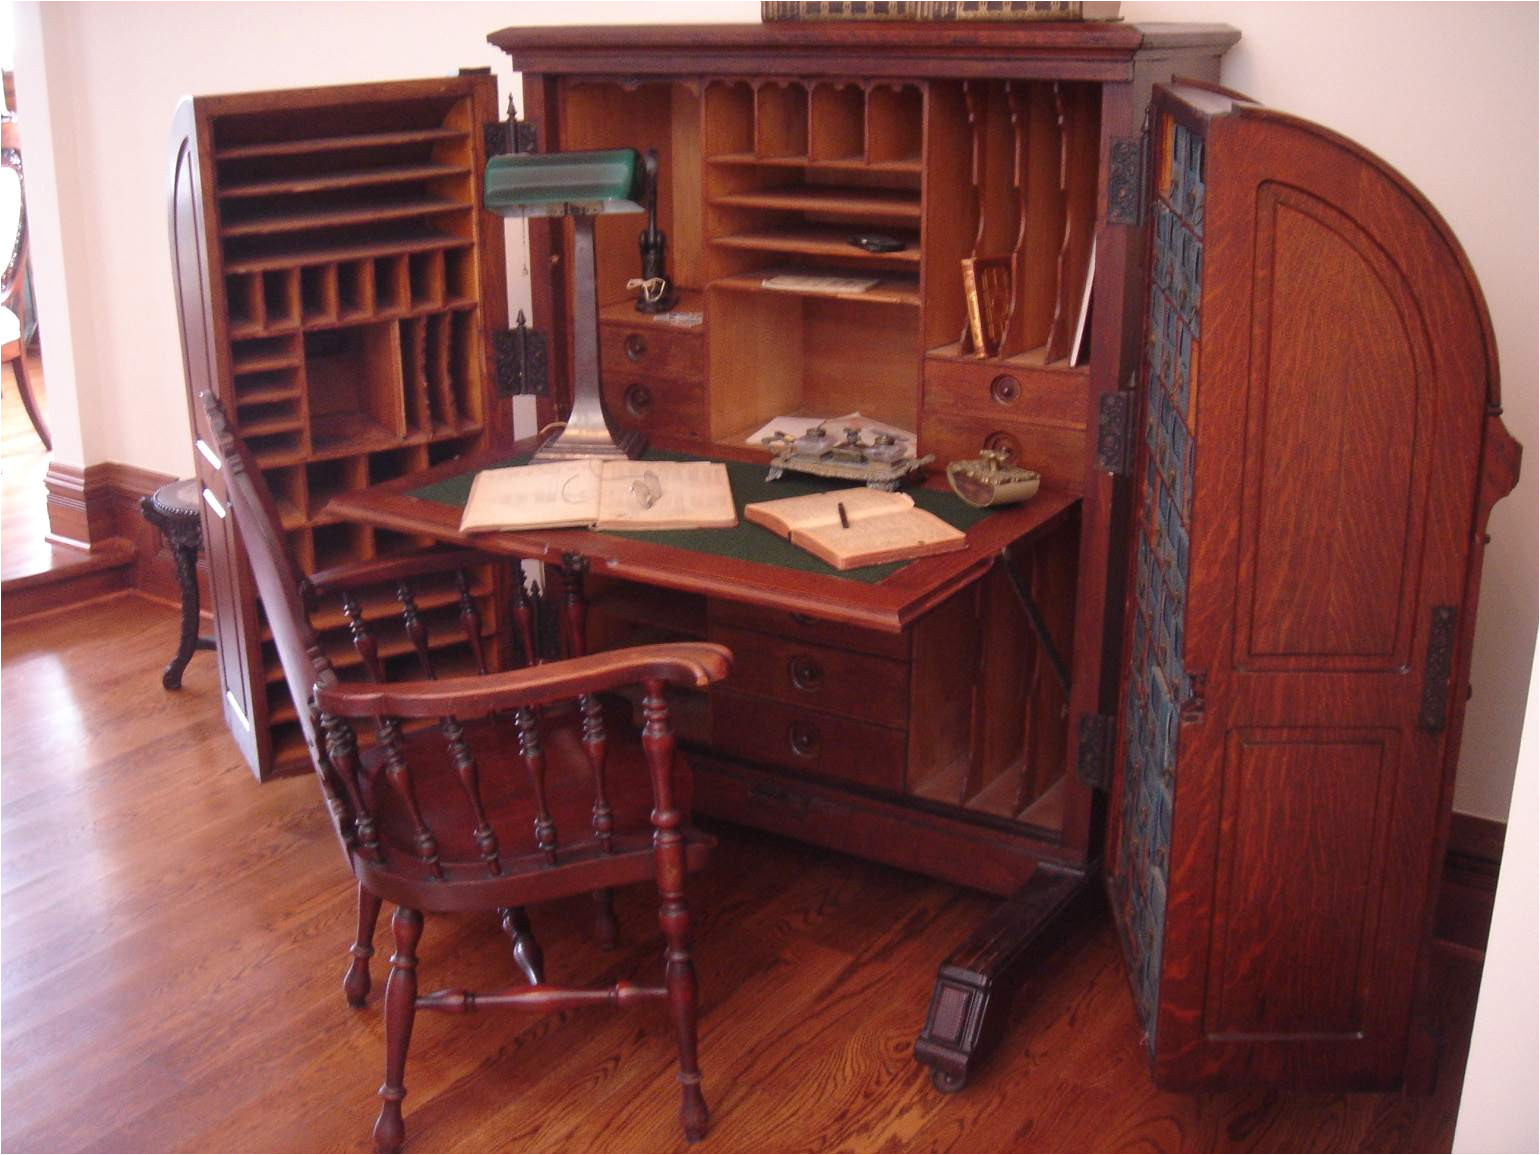 william s wooton desk in the queen anne mansion in eureka springs ark